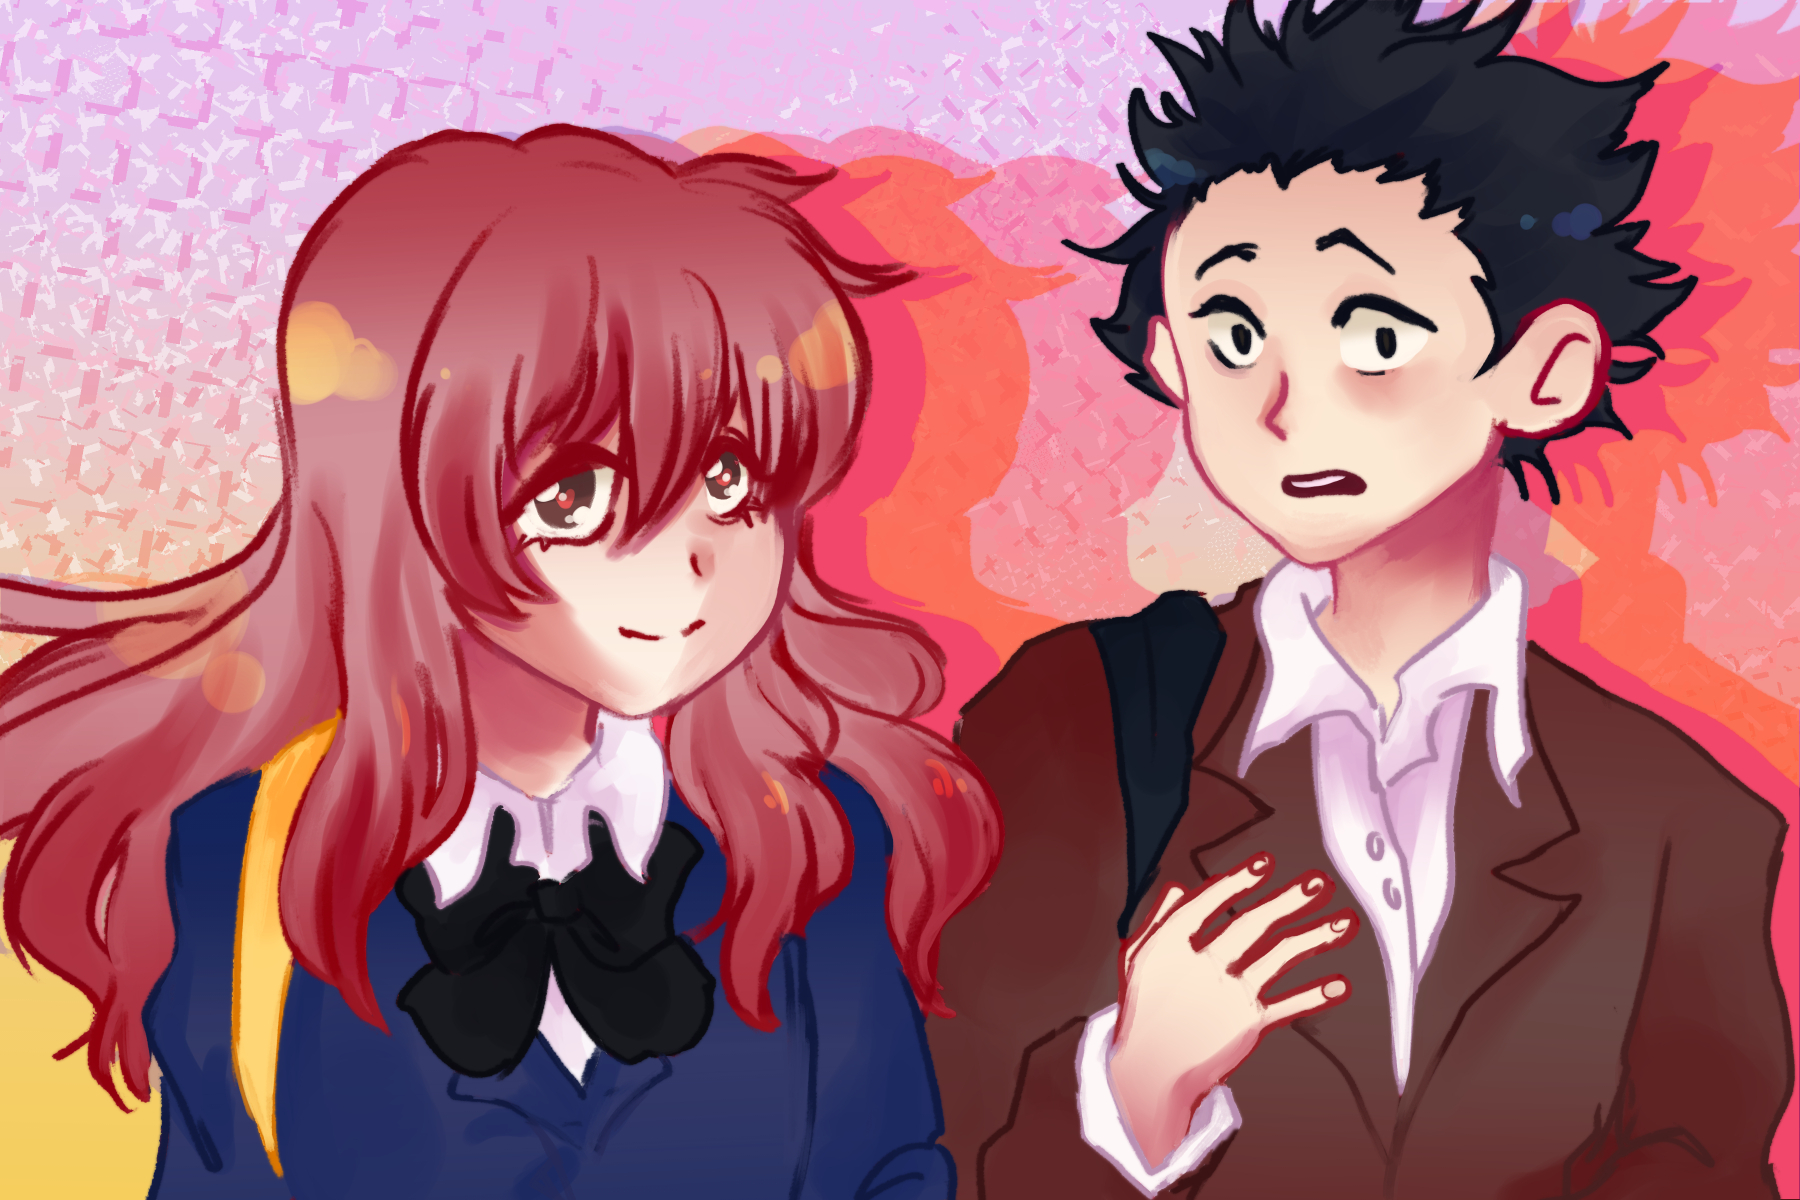 for an article about anime movies, an illustration of two anime characters, a girl with long pink hair and a boy with short black hair, dressed in school uniform blazers